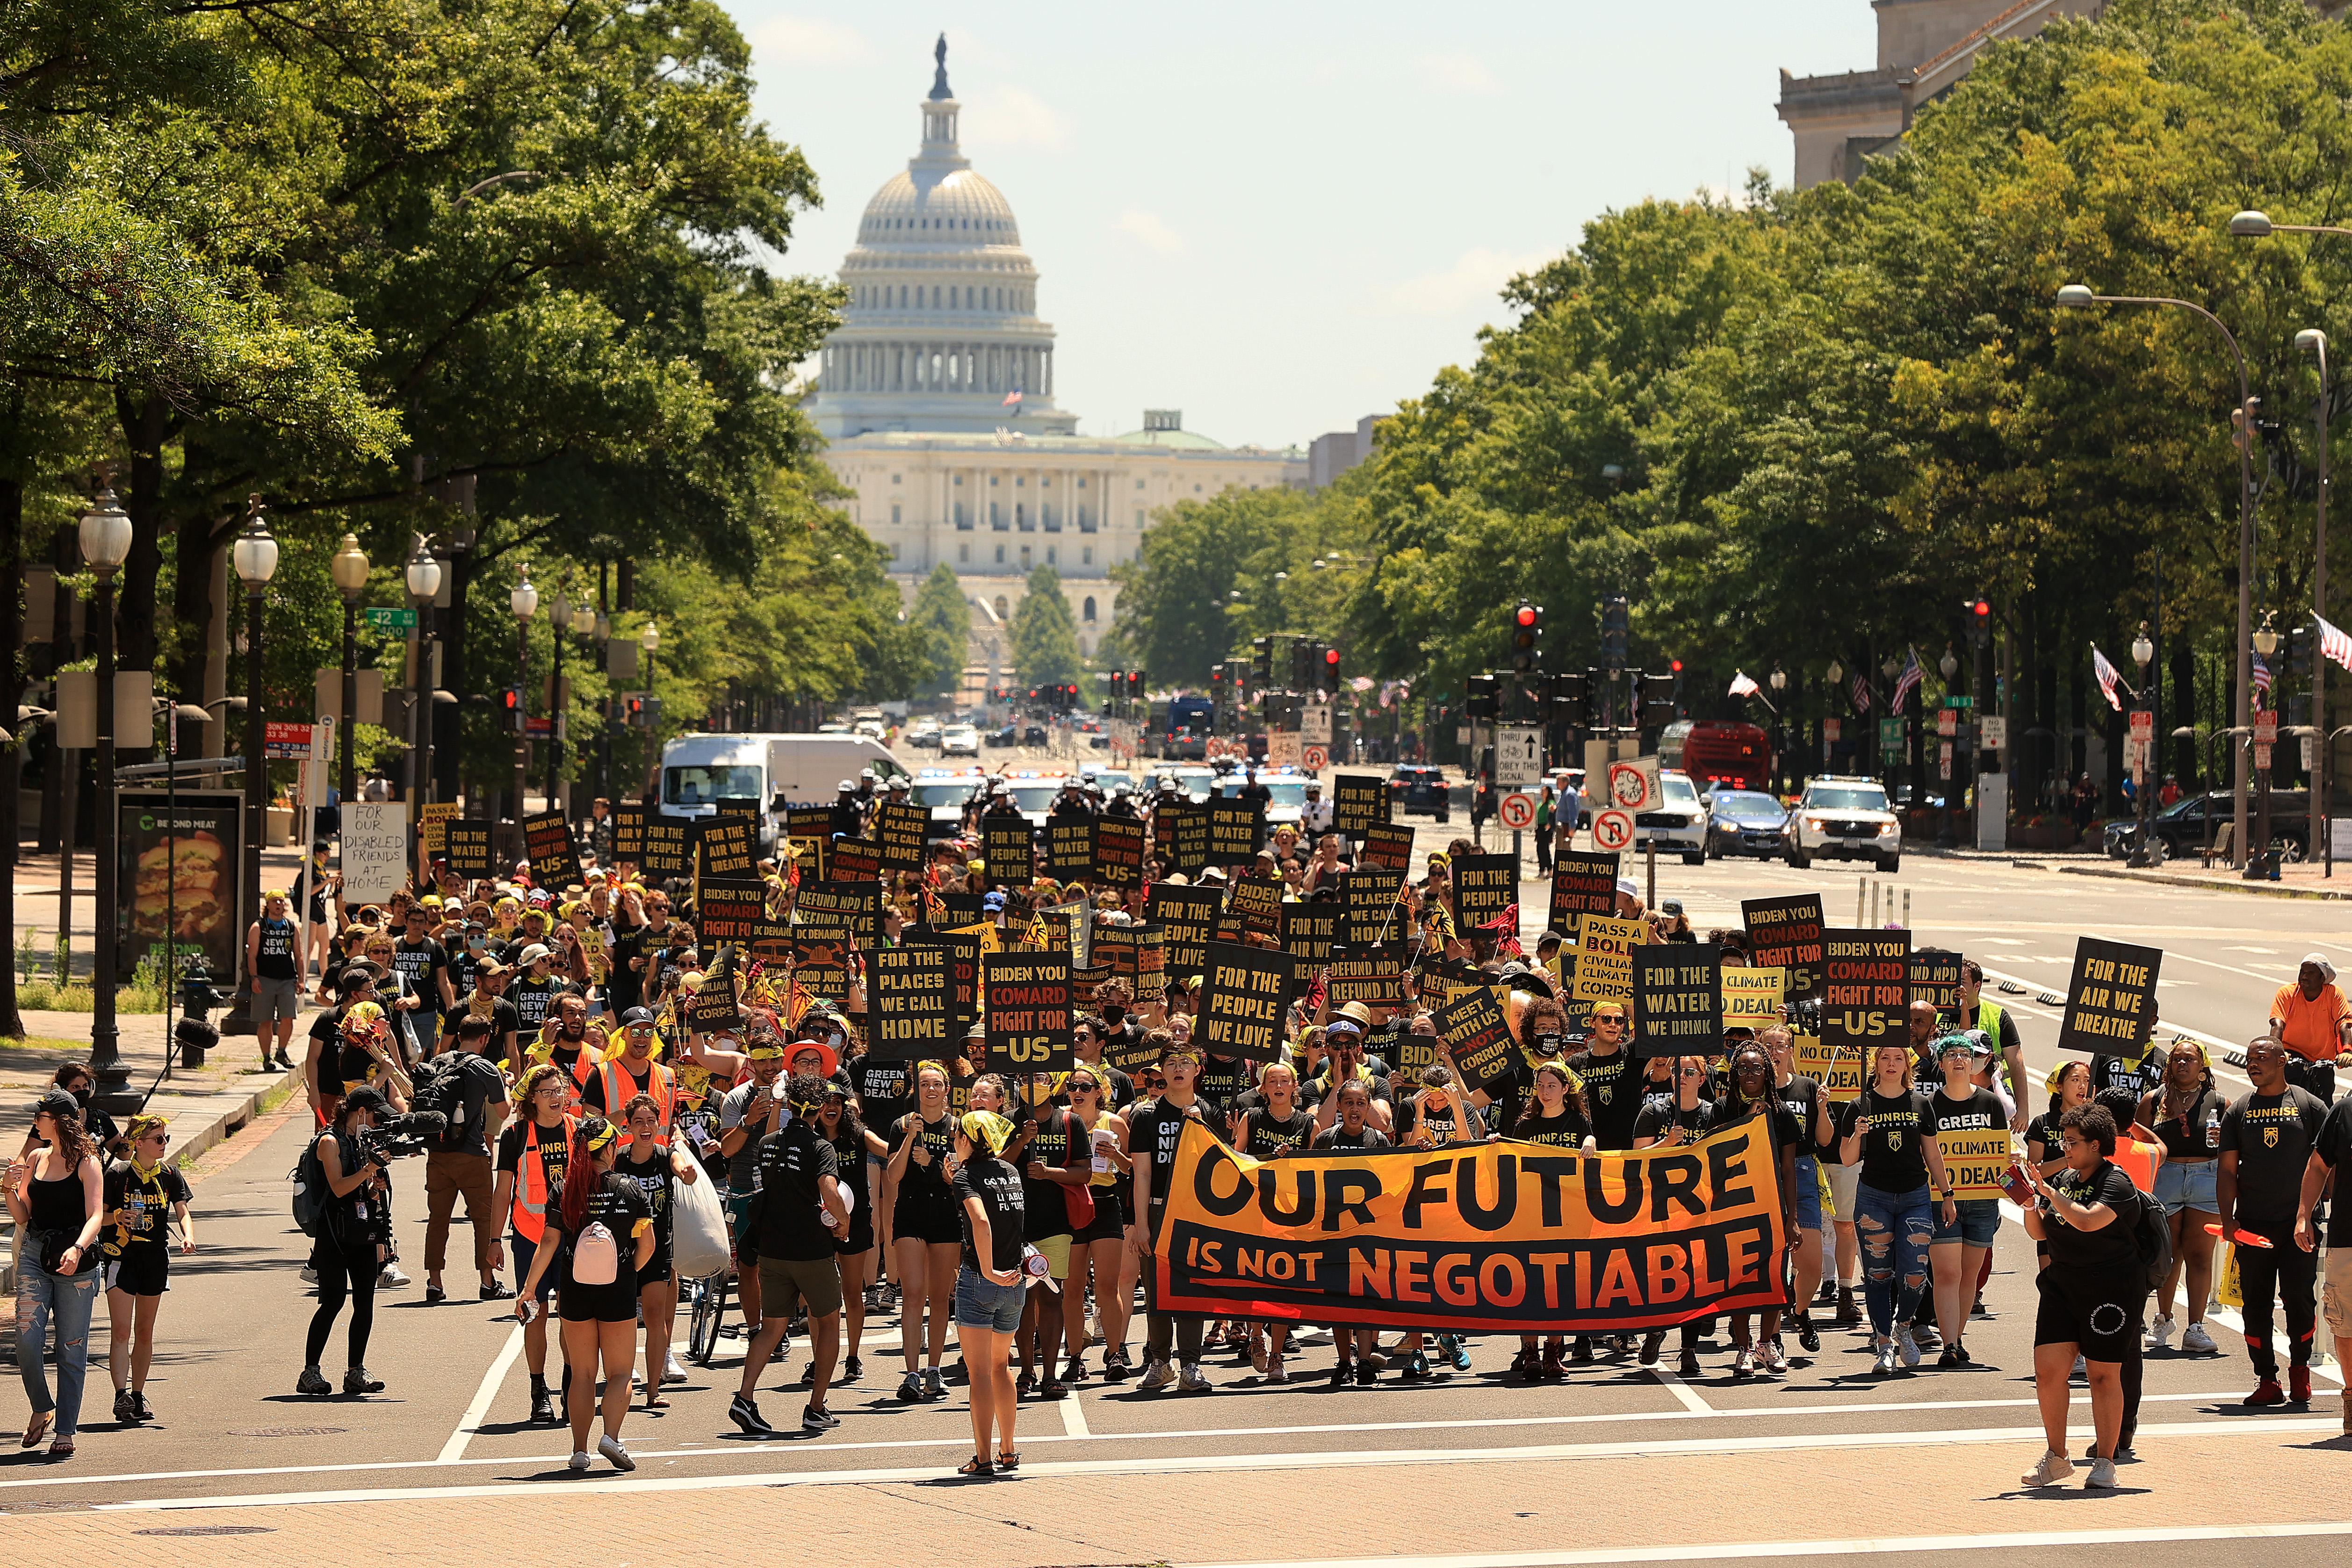 Hundreds of young climate activists marching along Pennsylvania Avenue to the White House. The Capitol is behind them, and they carry a sign with the phrase "Our future is not negotiable."